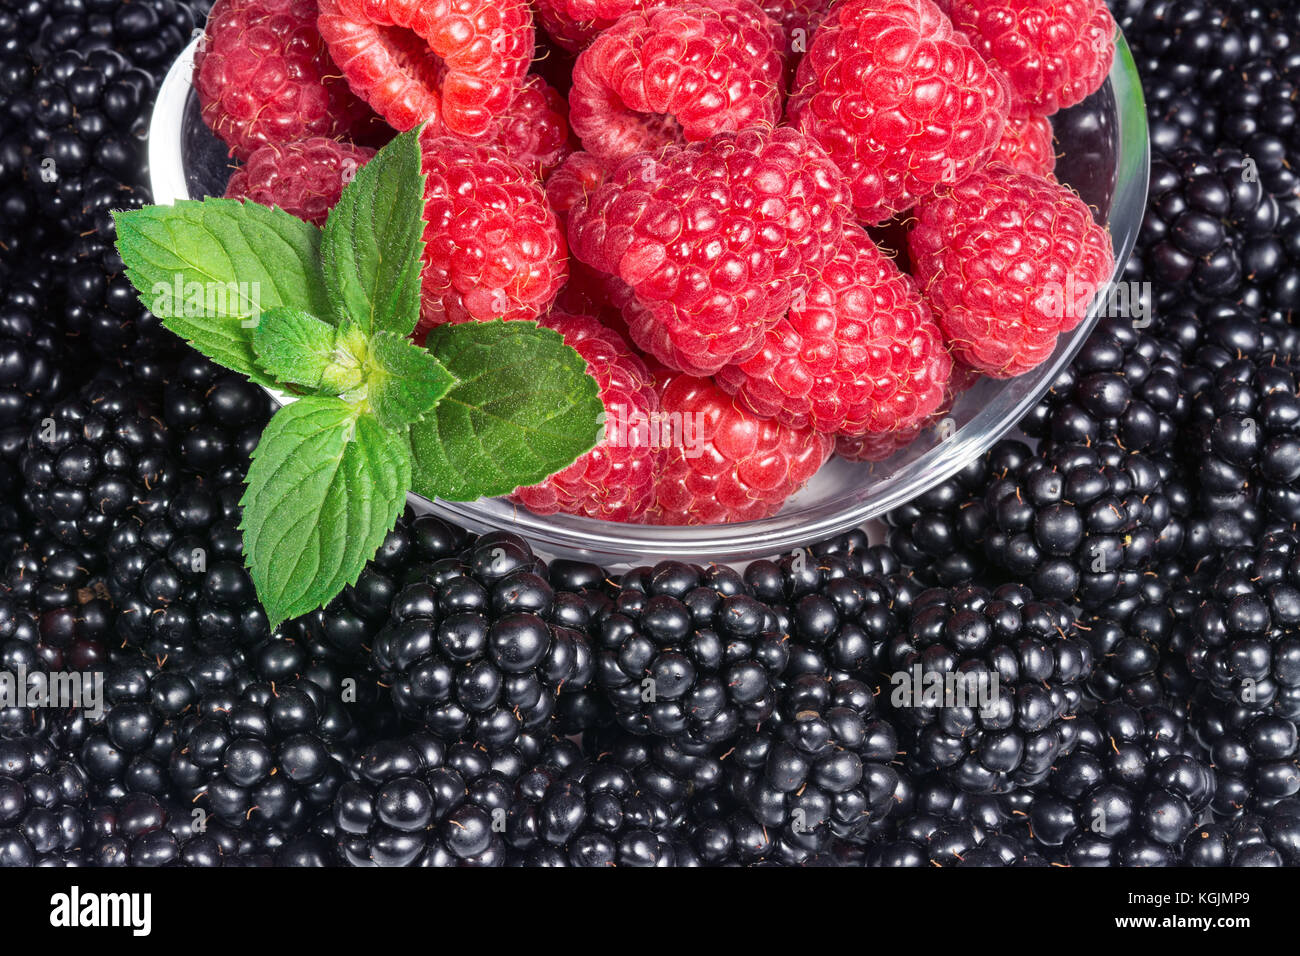 Red and black fruits with green mint leaf. Detail of juicy raspberries in glass bowl on the background full of sweet blackberries. Stock Photo